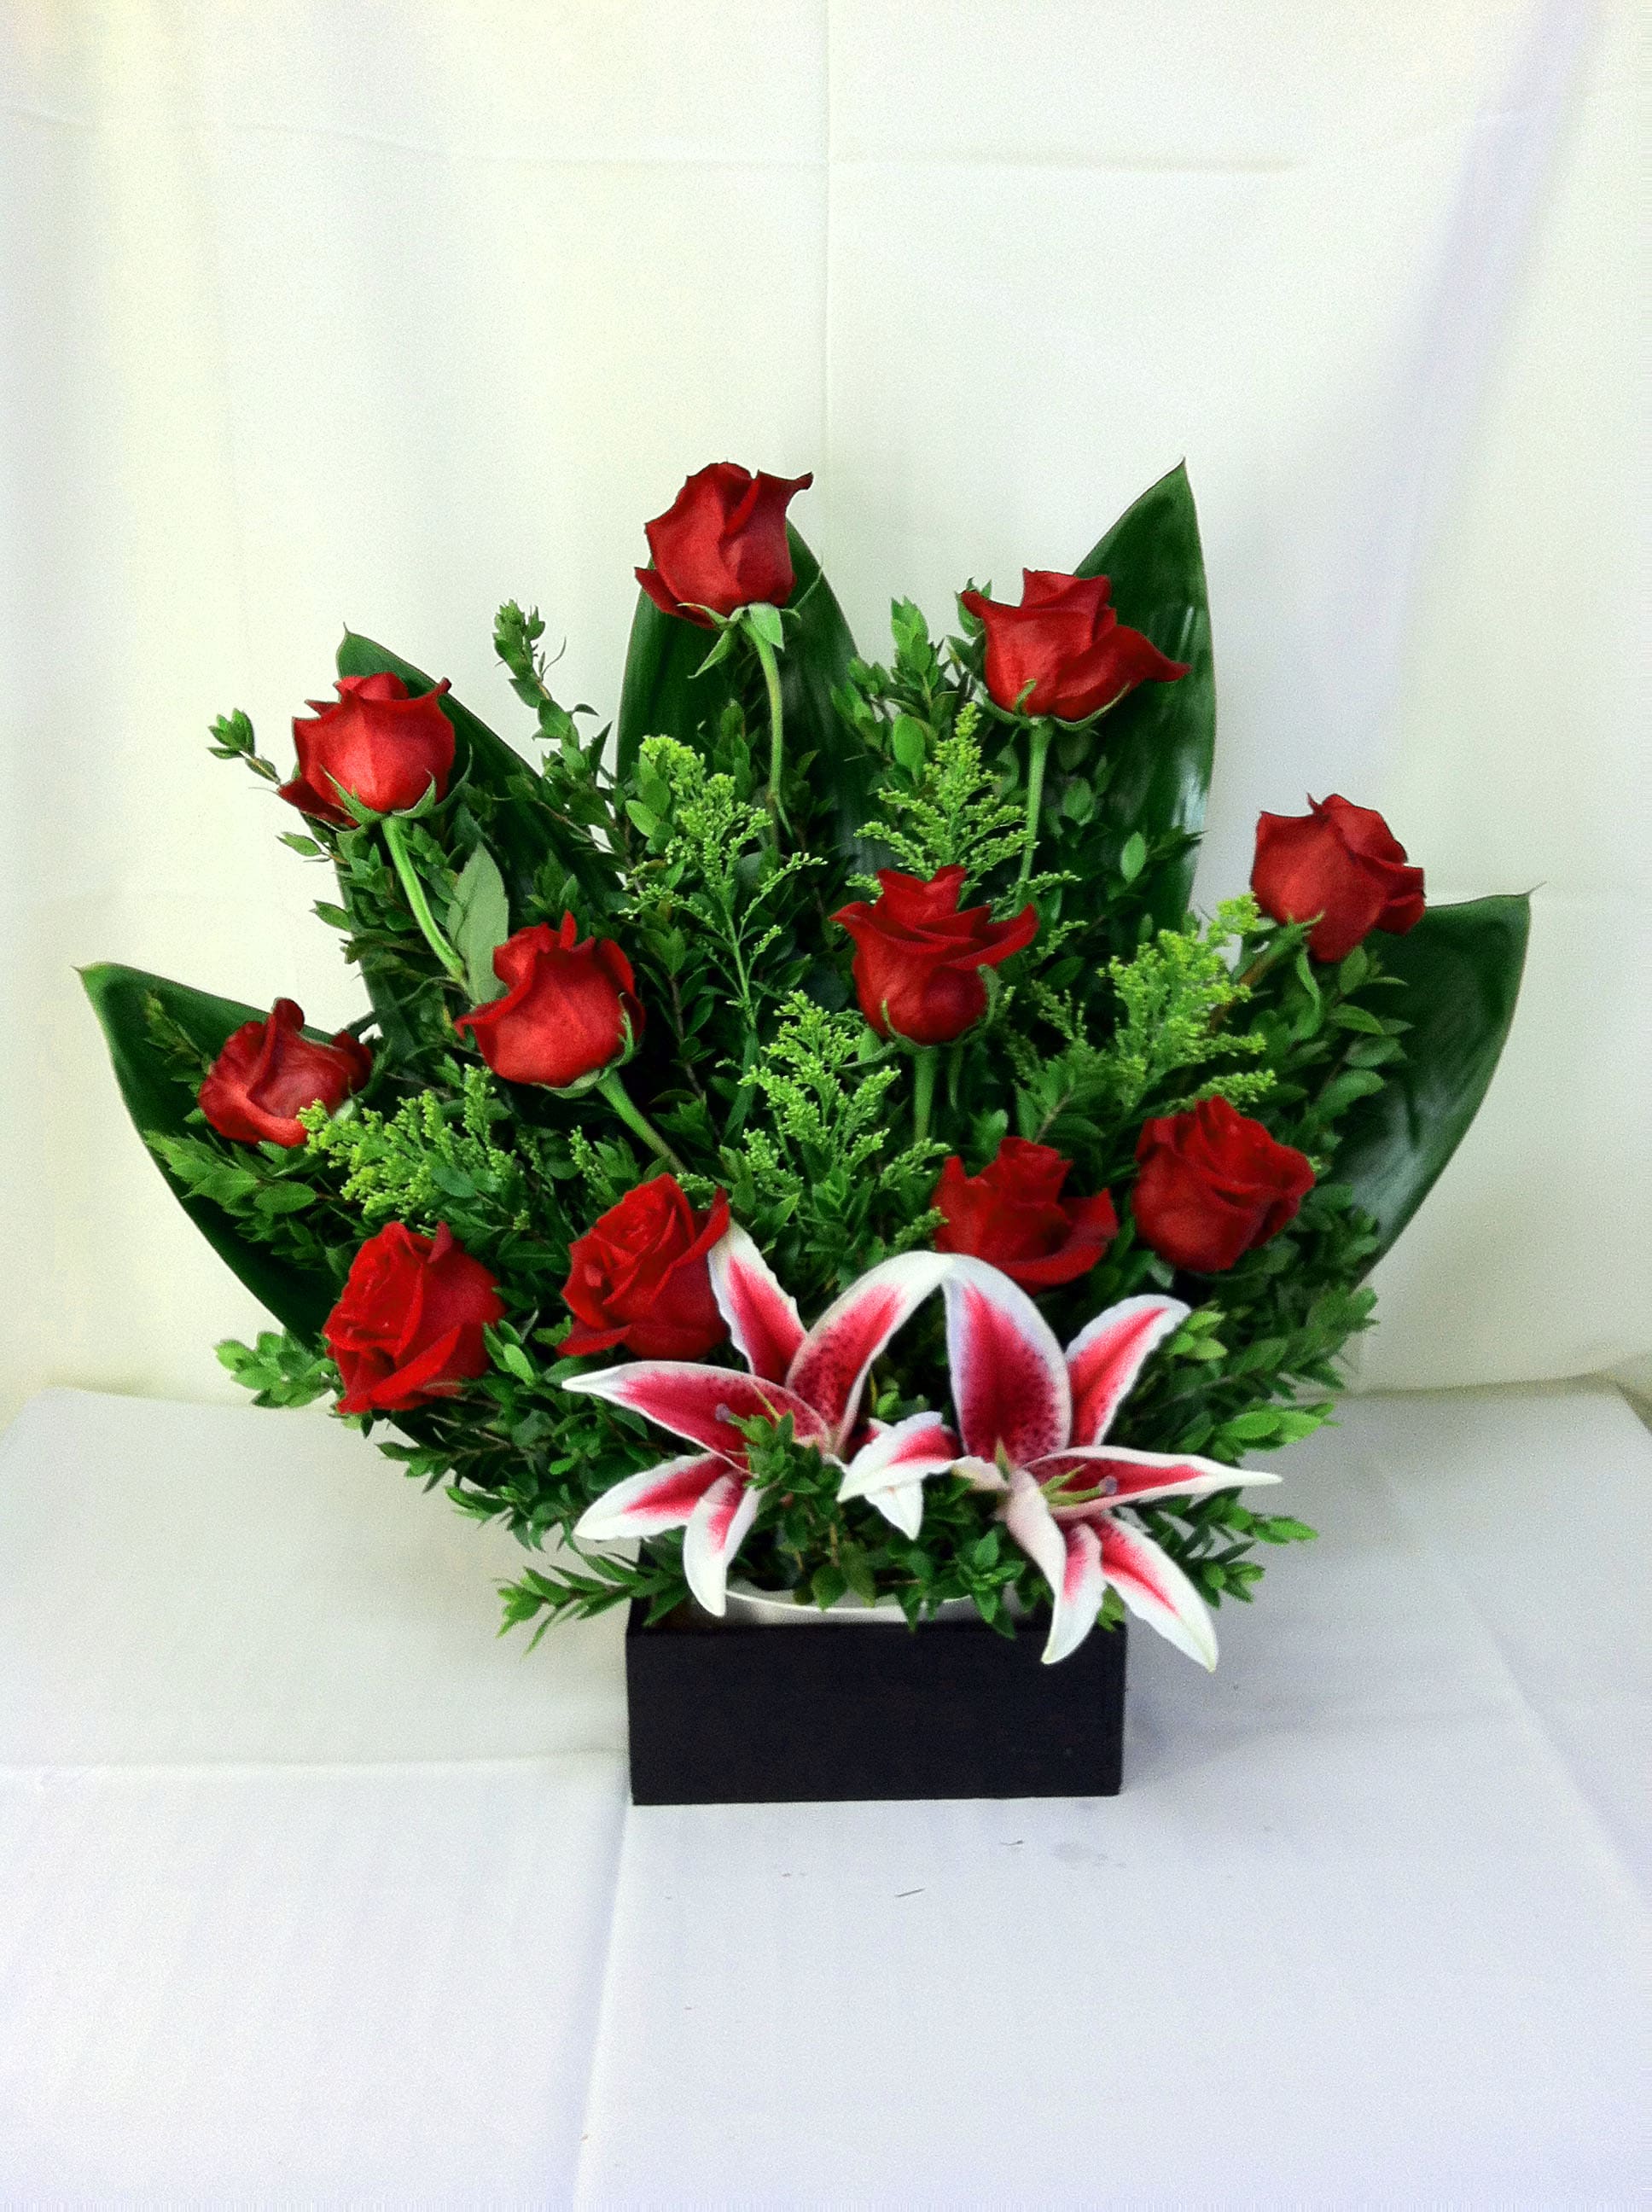 Flamingo's Flowers - Abundant Love - Cherish someone special by presenting a unique assortment of flowers and colors. Star gazers, red roses and greens are expertly designed in a wooded Box that is sure to warm hearts.